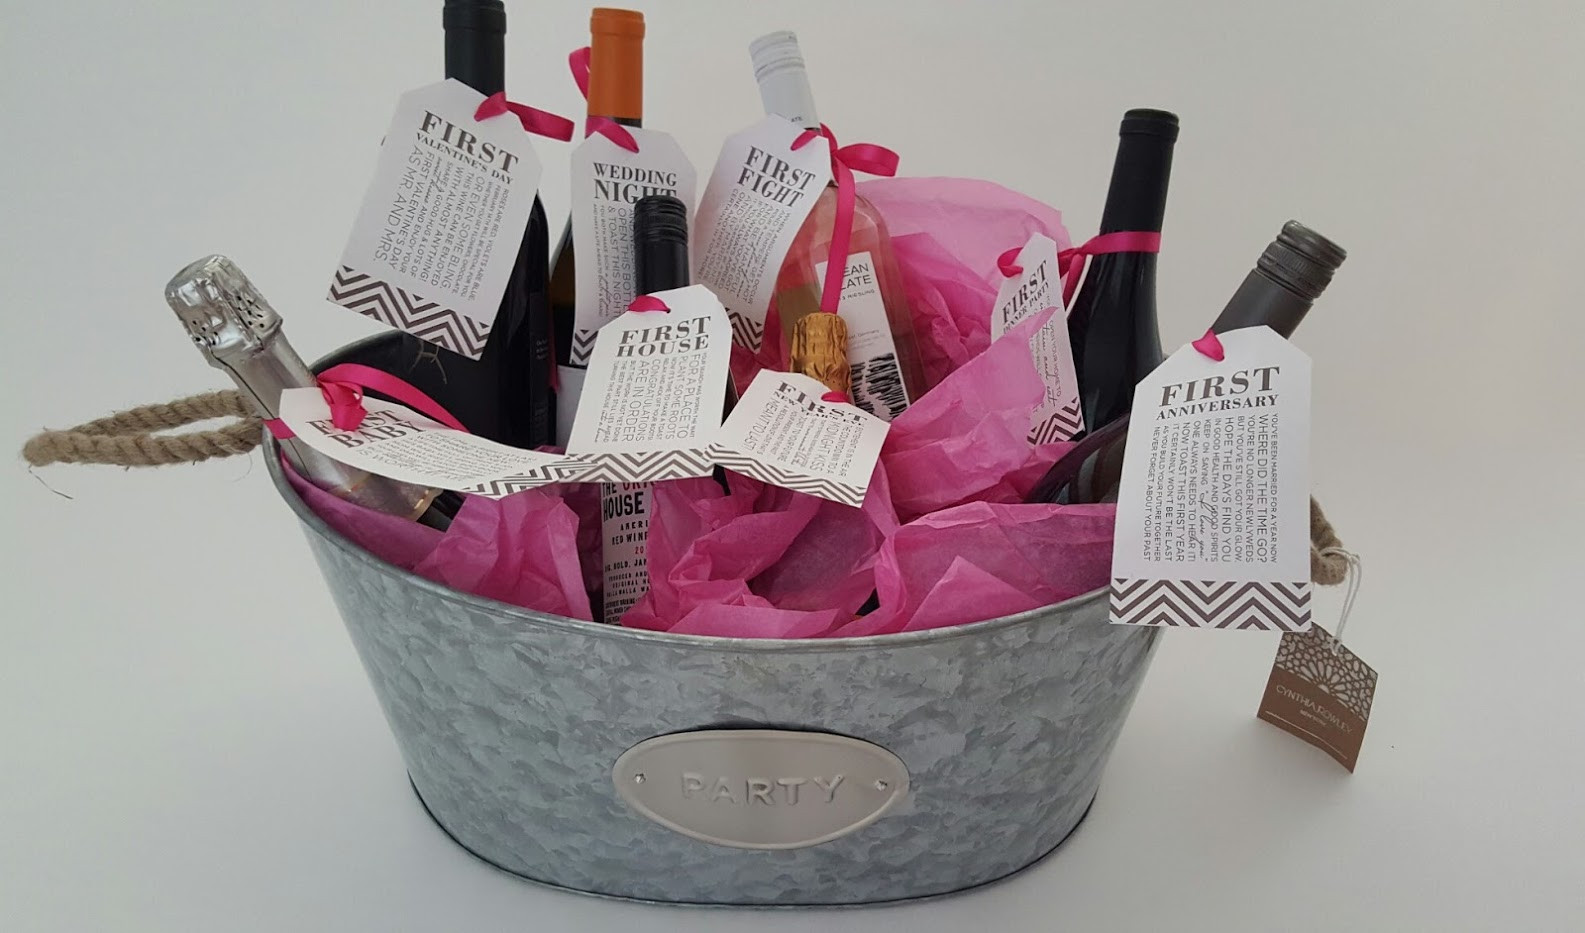 DIY Wedding Gift Baskets
 Bridal Shower Gift DIY to Try A Basket of “Firsts” for